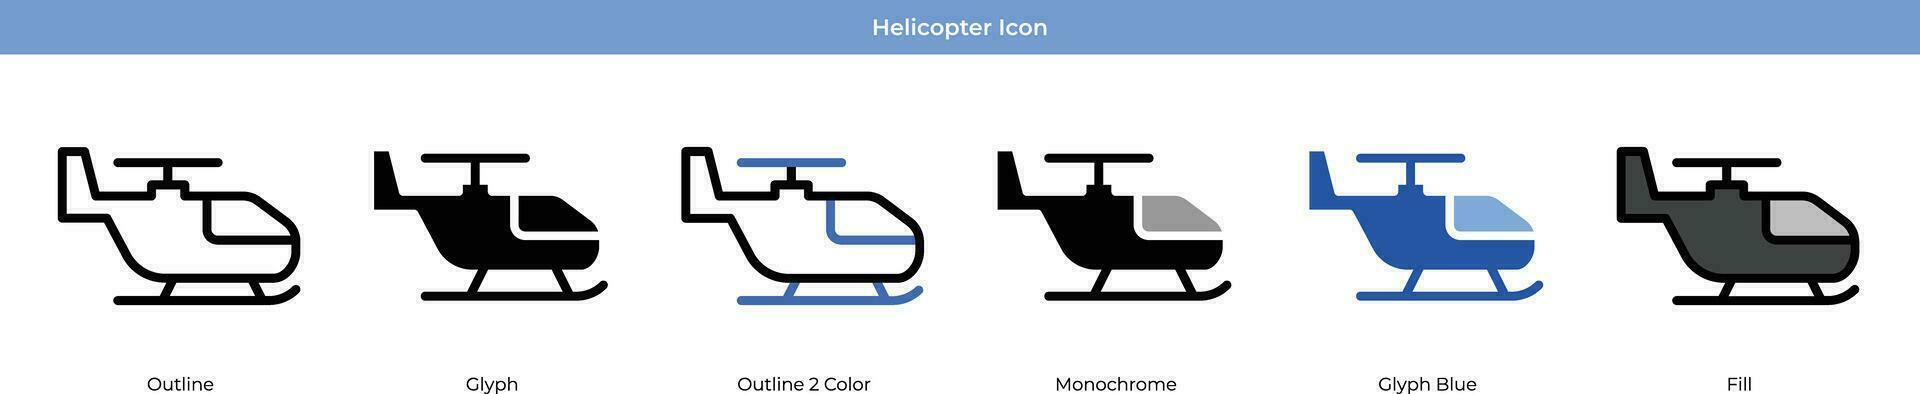 Helicopter Icon Set Vector